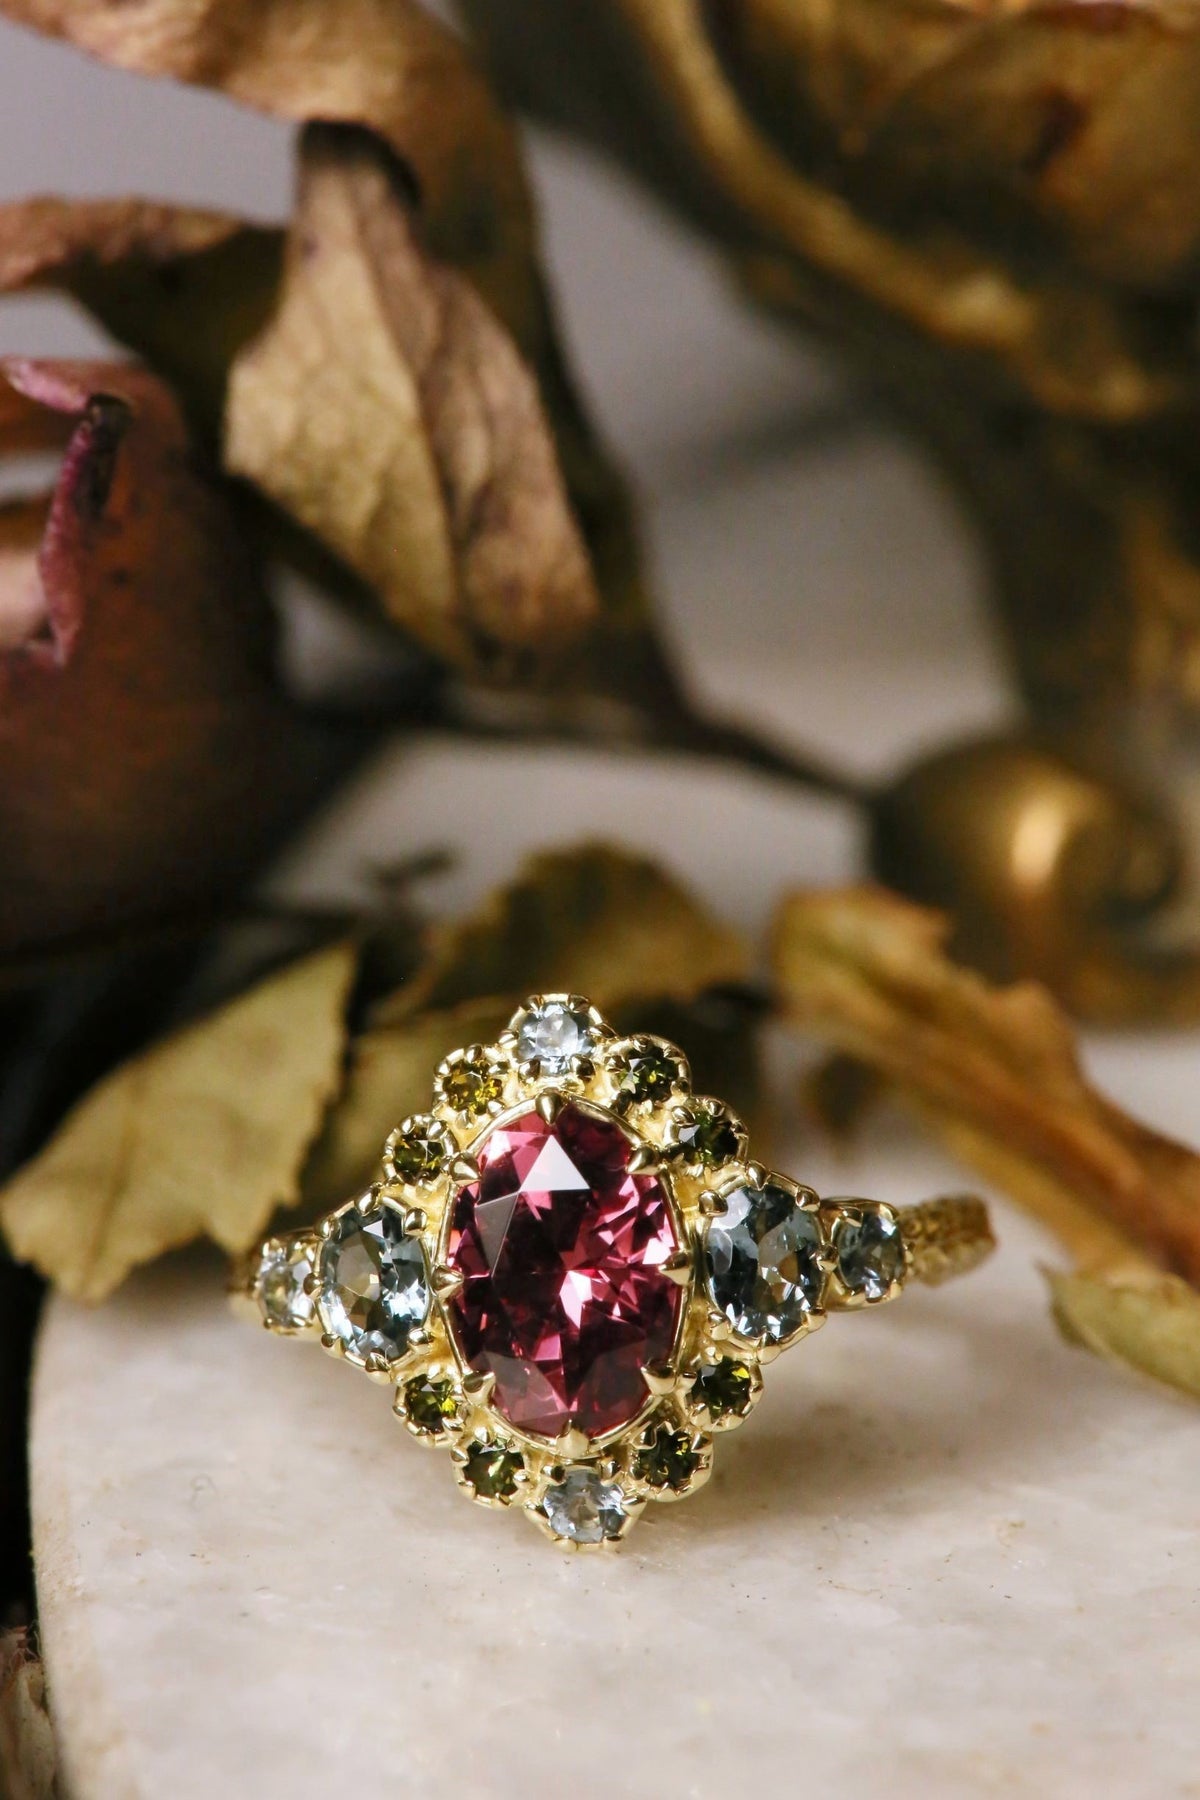 The Scrying Mirror Ring in Garnet